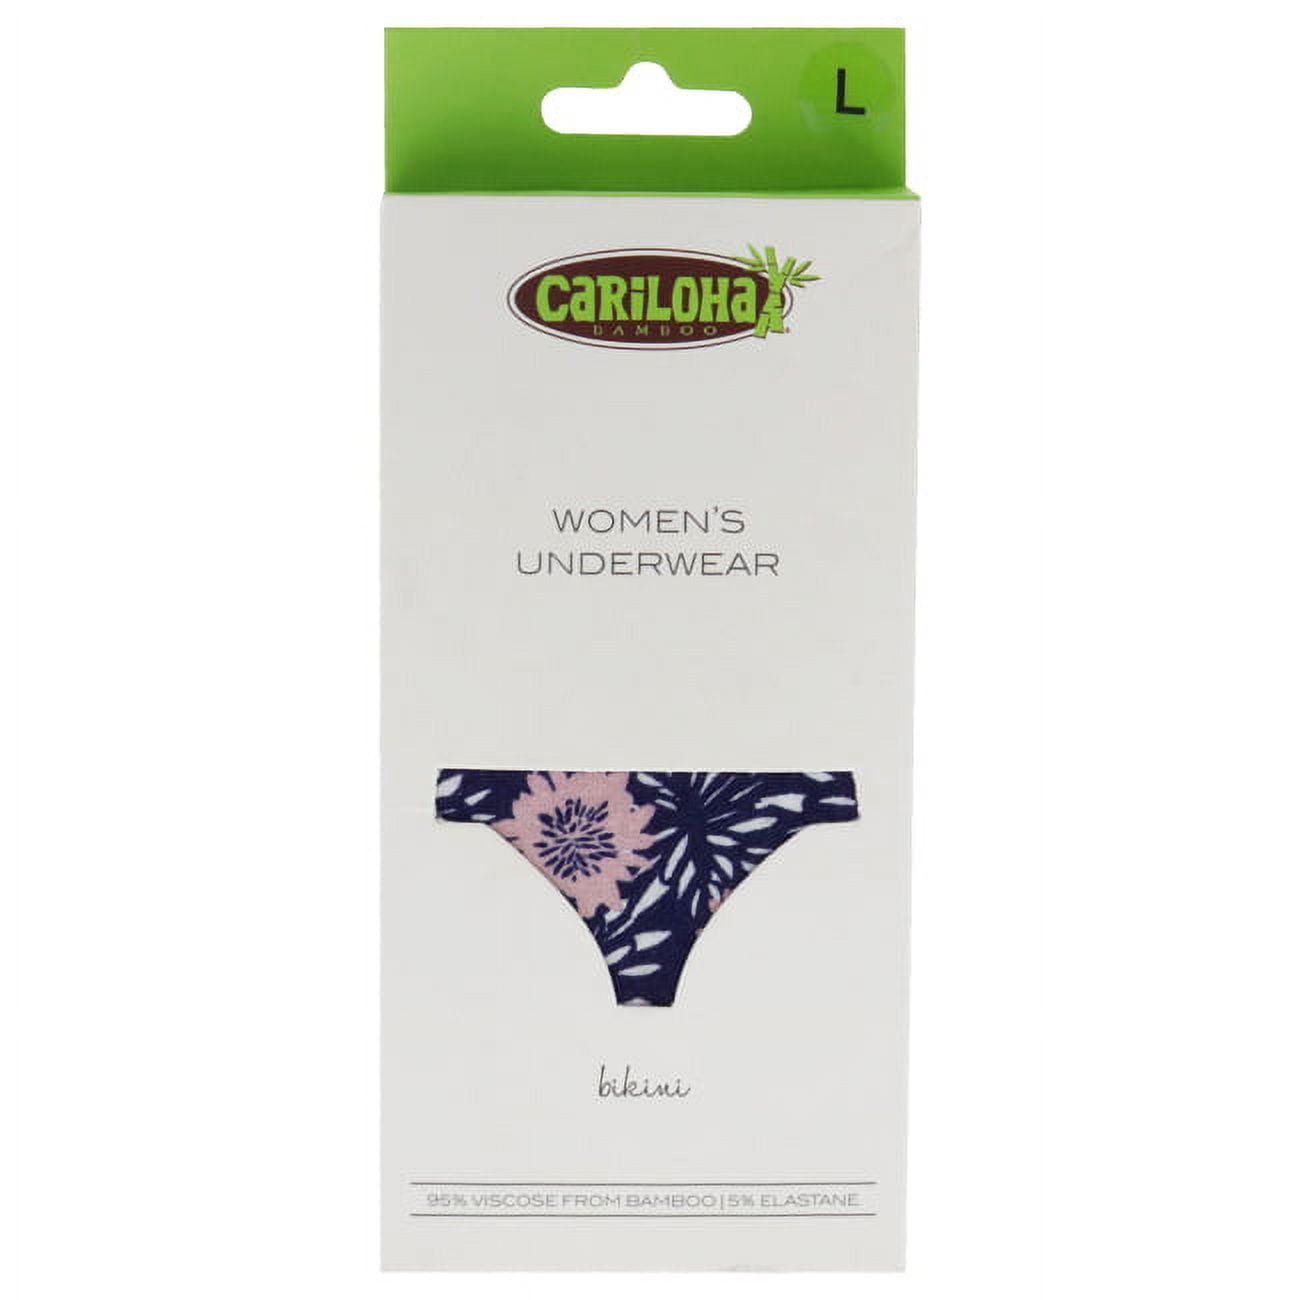 Cariloha Bamboo Lace Bikini Panty - Soft & Durable Low-Rise Panty - Sexy  Lace Waistband - Comfortable & Stylish - Lightweight & Breathable -  Moderate Rear Coverage - M - Navy Floral For Women - 1 Pc 